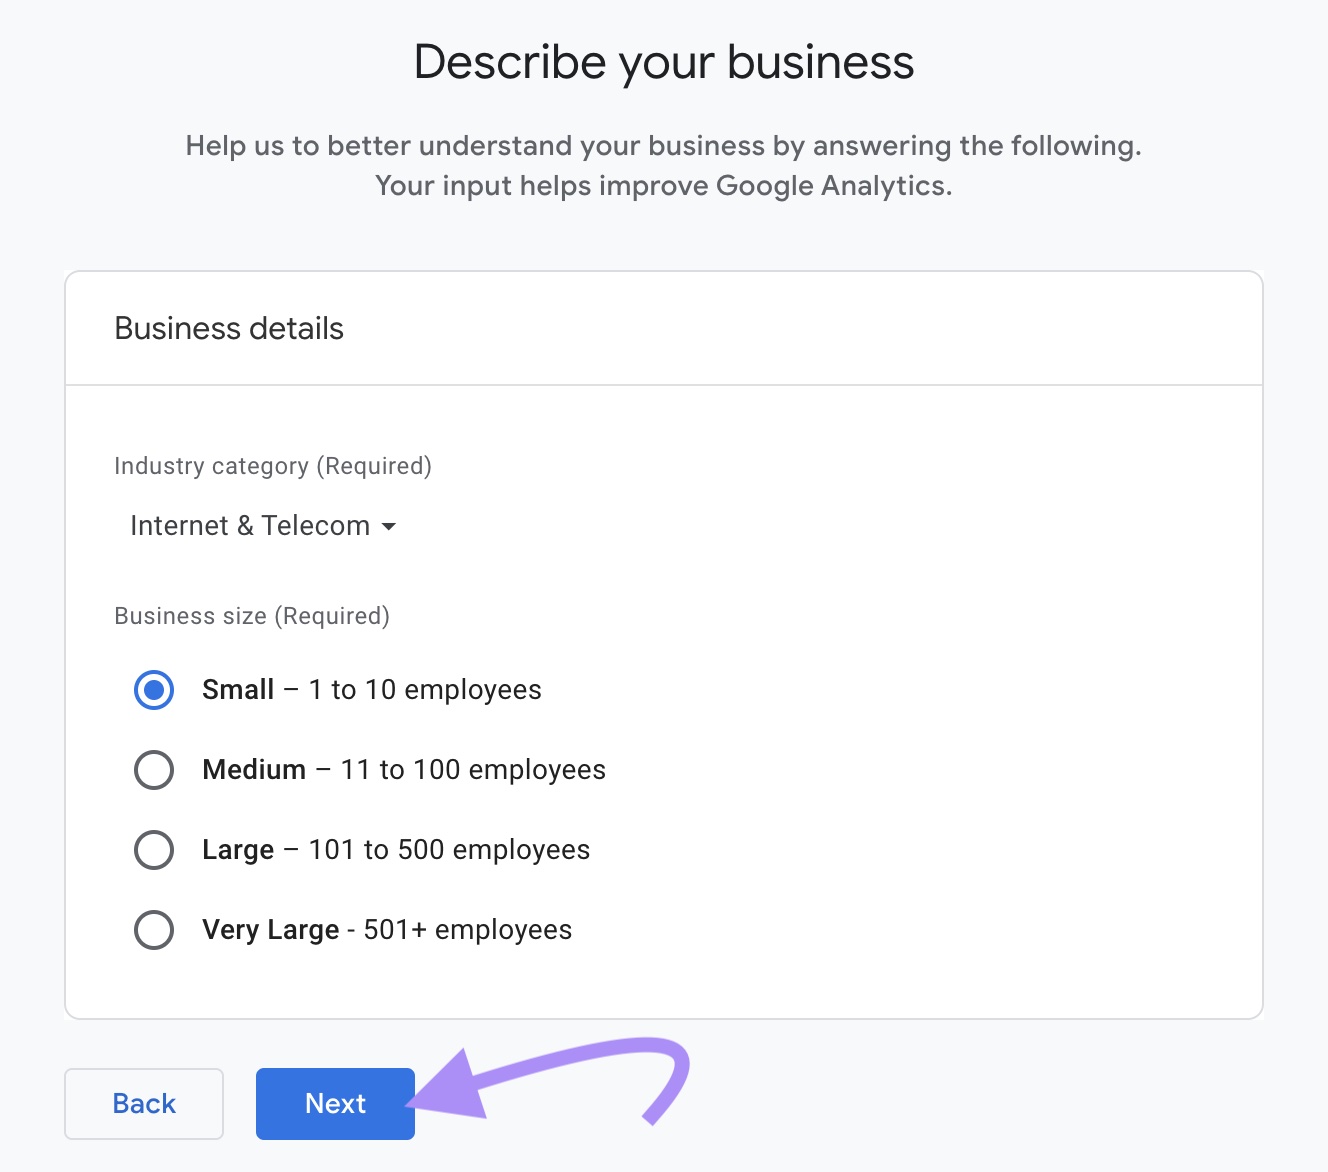 "Next" button highlighted at the bottom of "Describe your business" step